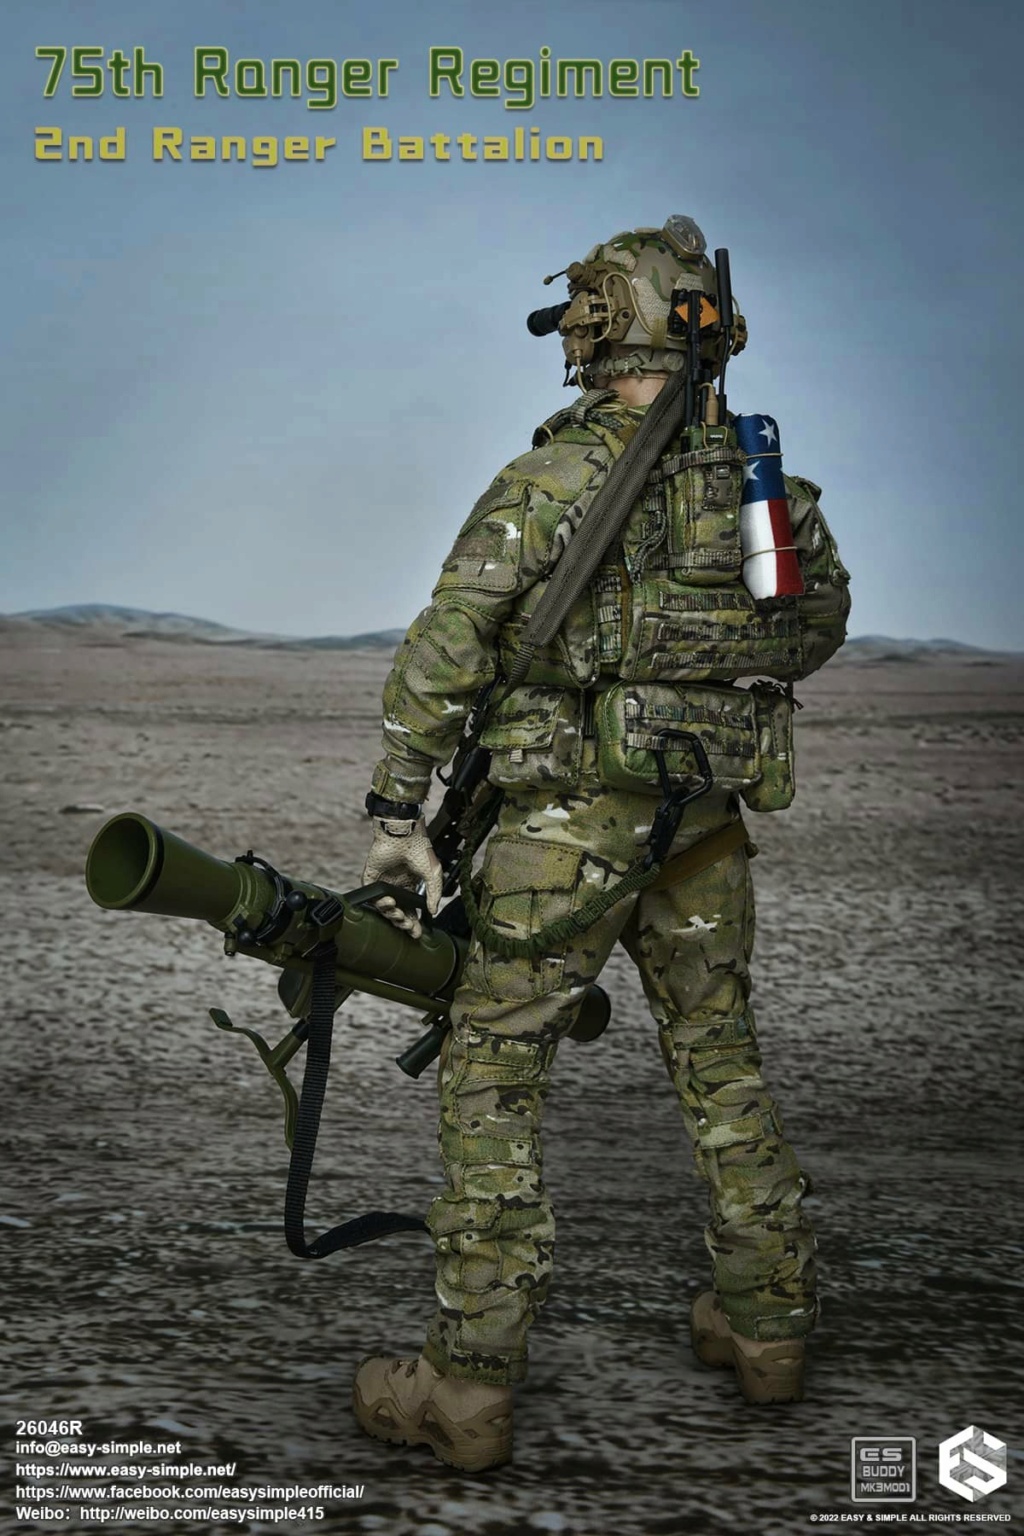 NEW PRODUCT: Easy&Simple: 26046R 1/6 Scale 75th Ranger Regiment 2nd Ranger Battalion 27613711